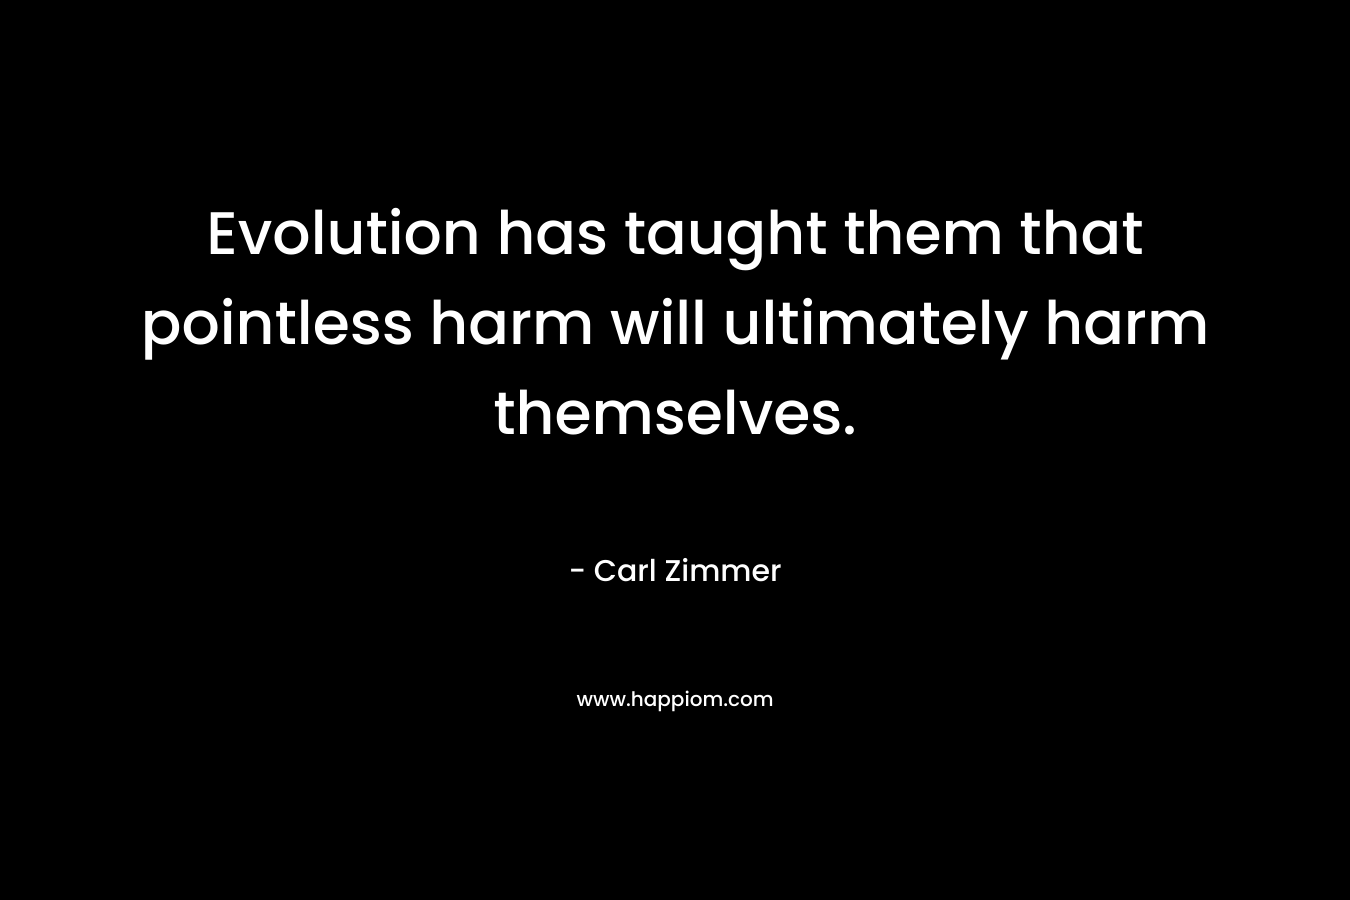 Evolution has taught them that pointless harm will ultimately harm themselves.